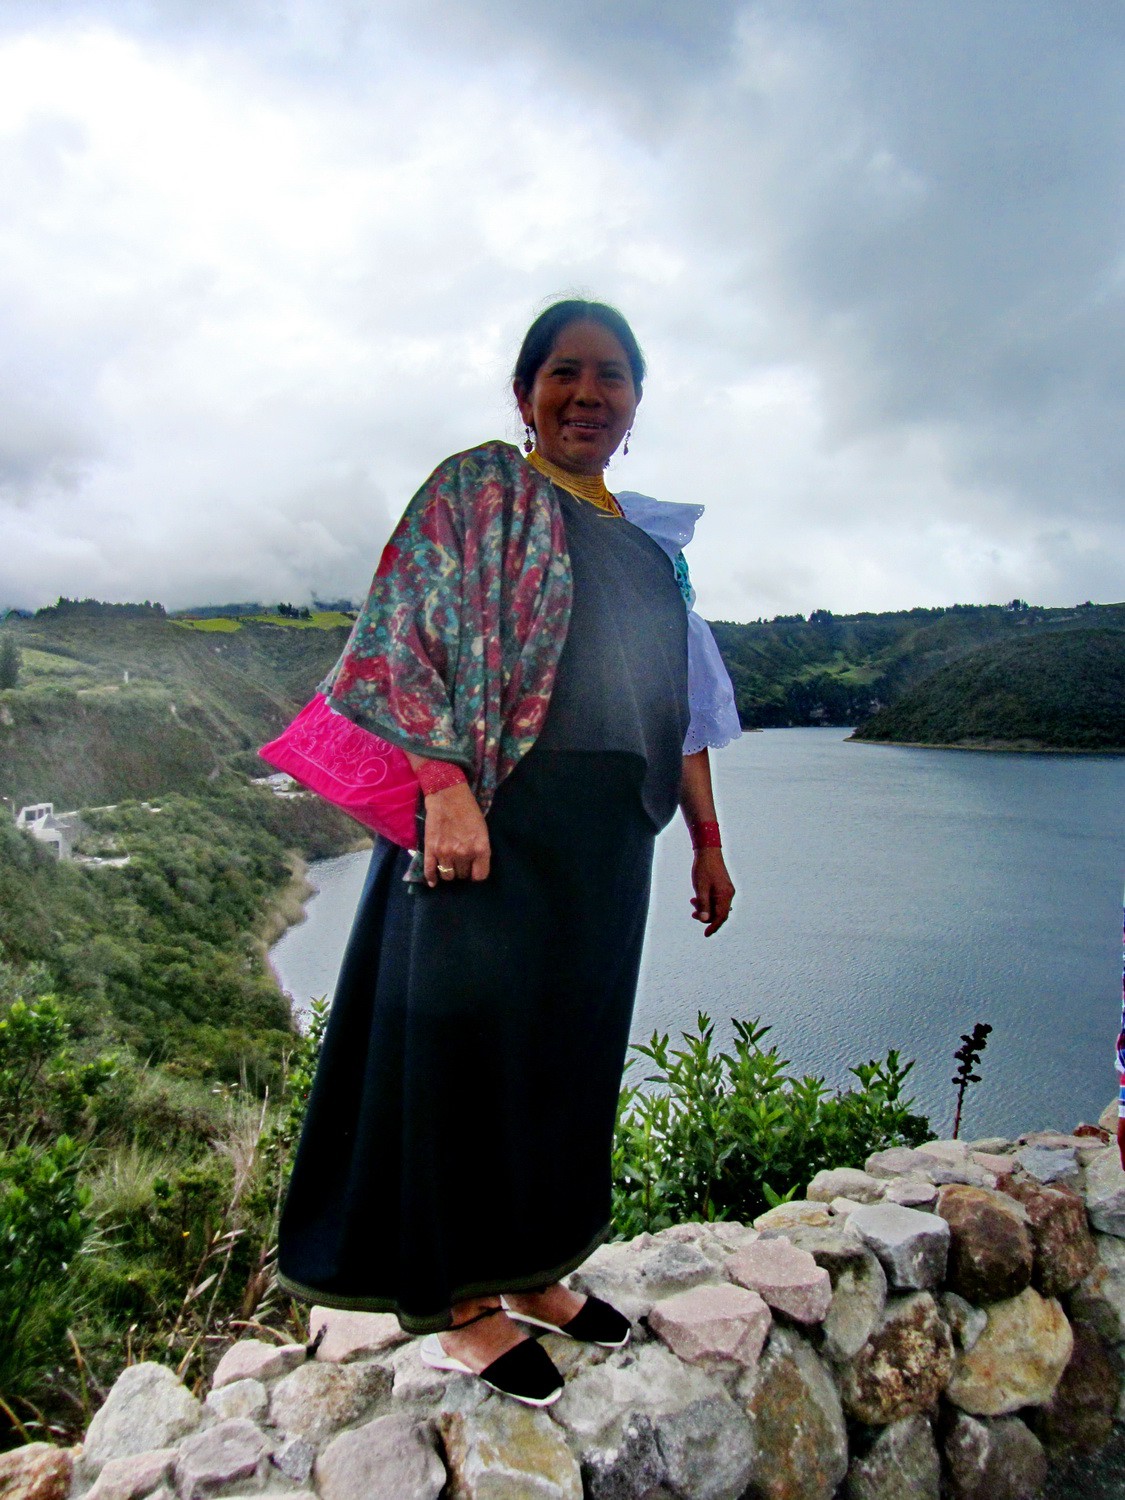 Woman wearing the tradicional costume of the indigenous people of this region